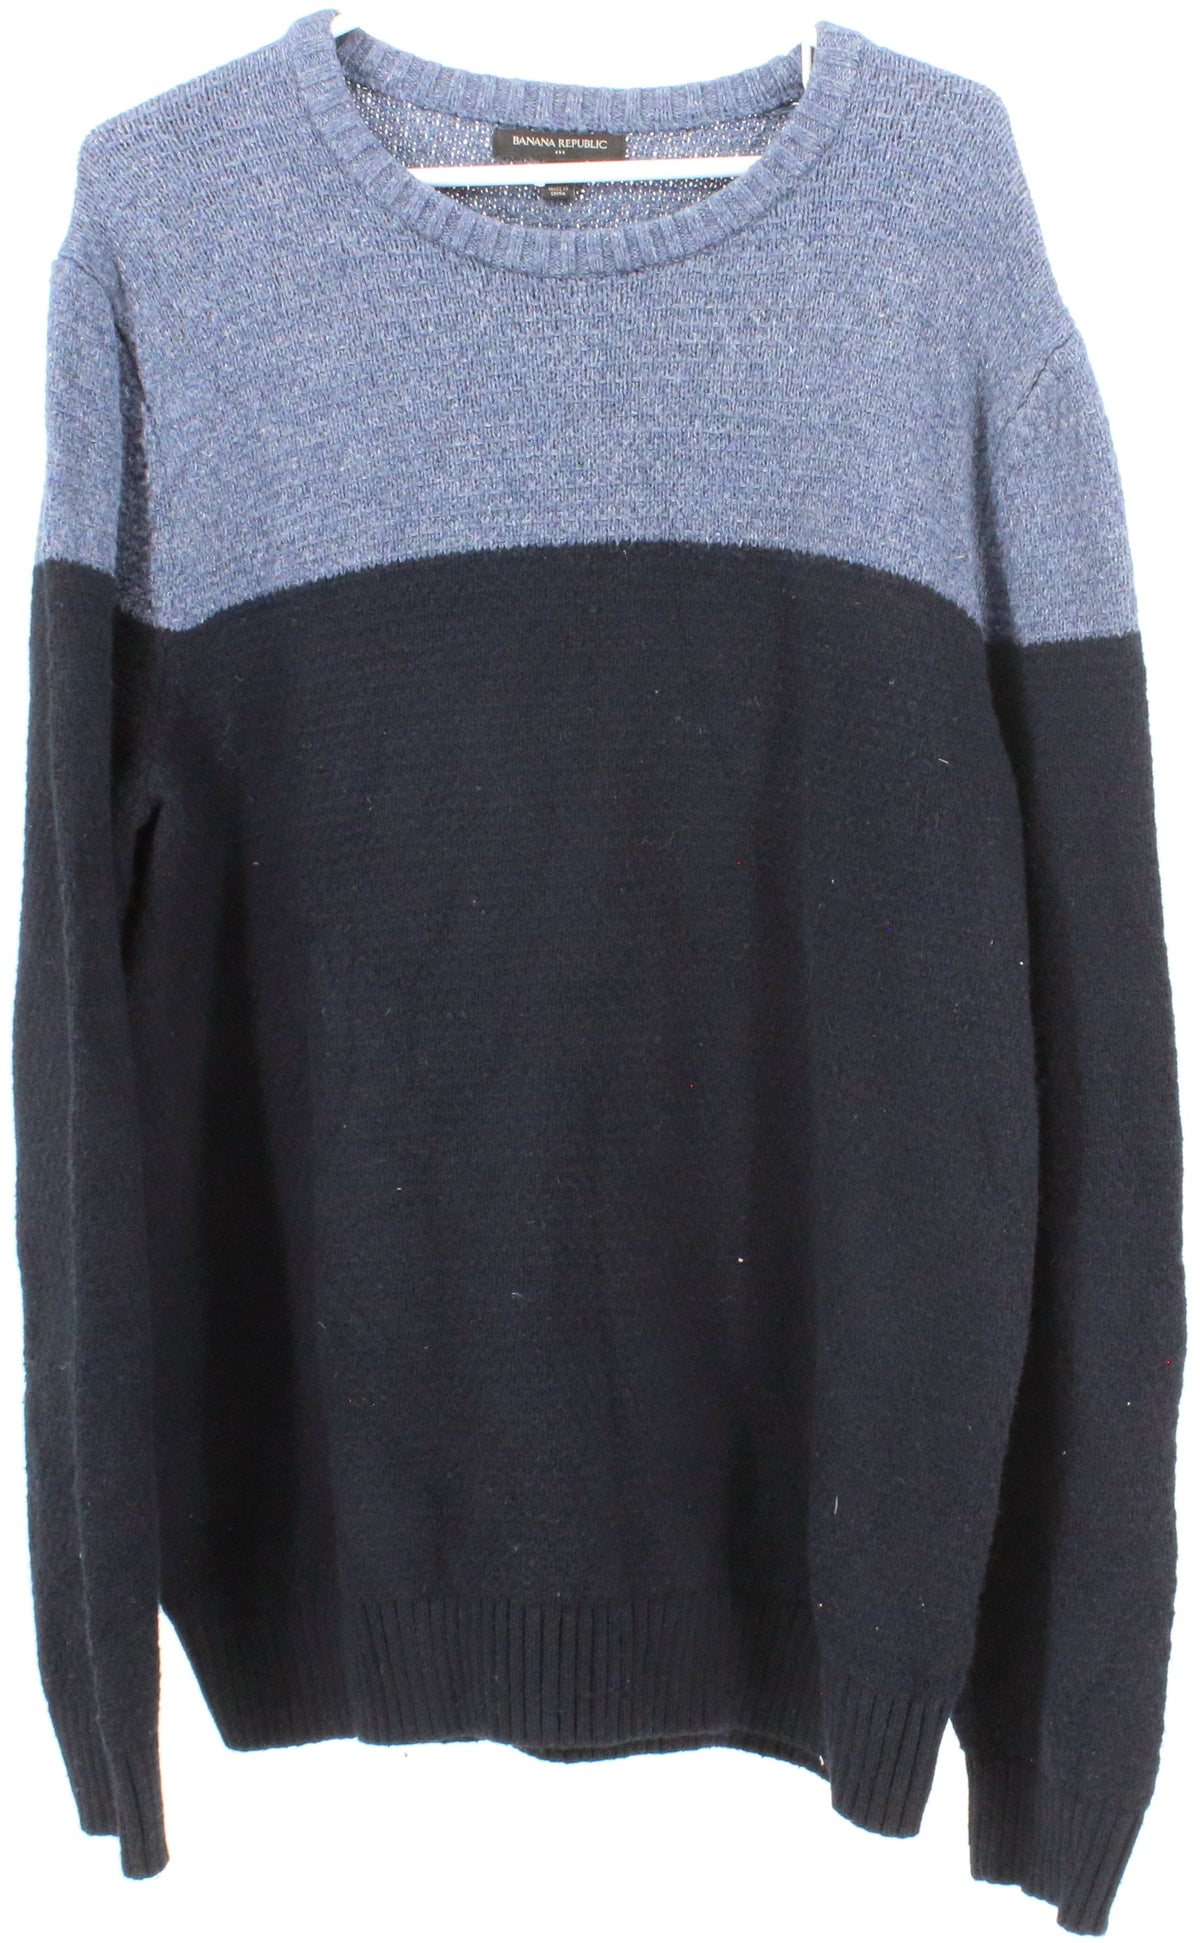 Banana Republic Navy Blue and Blue Sweater